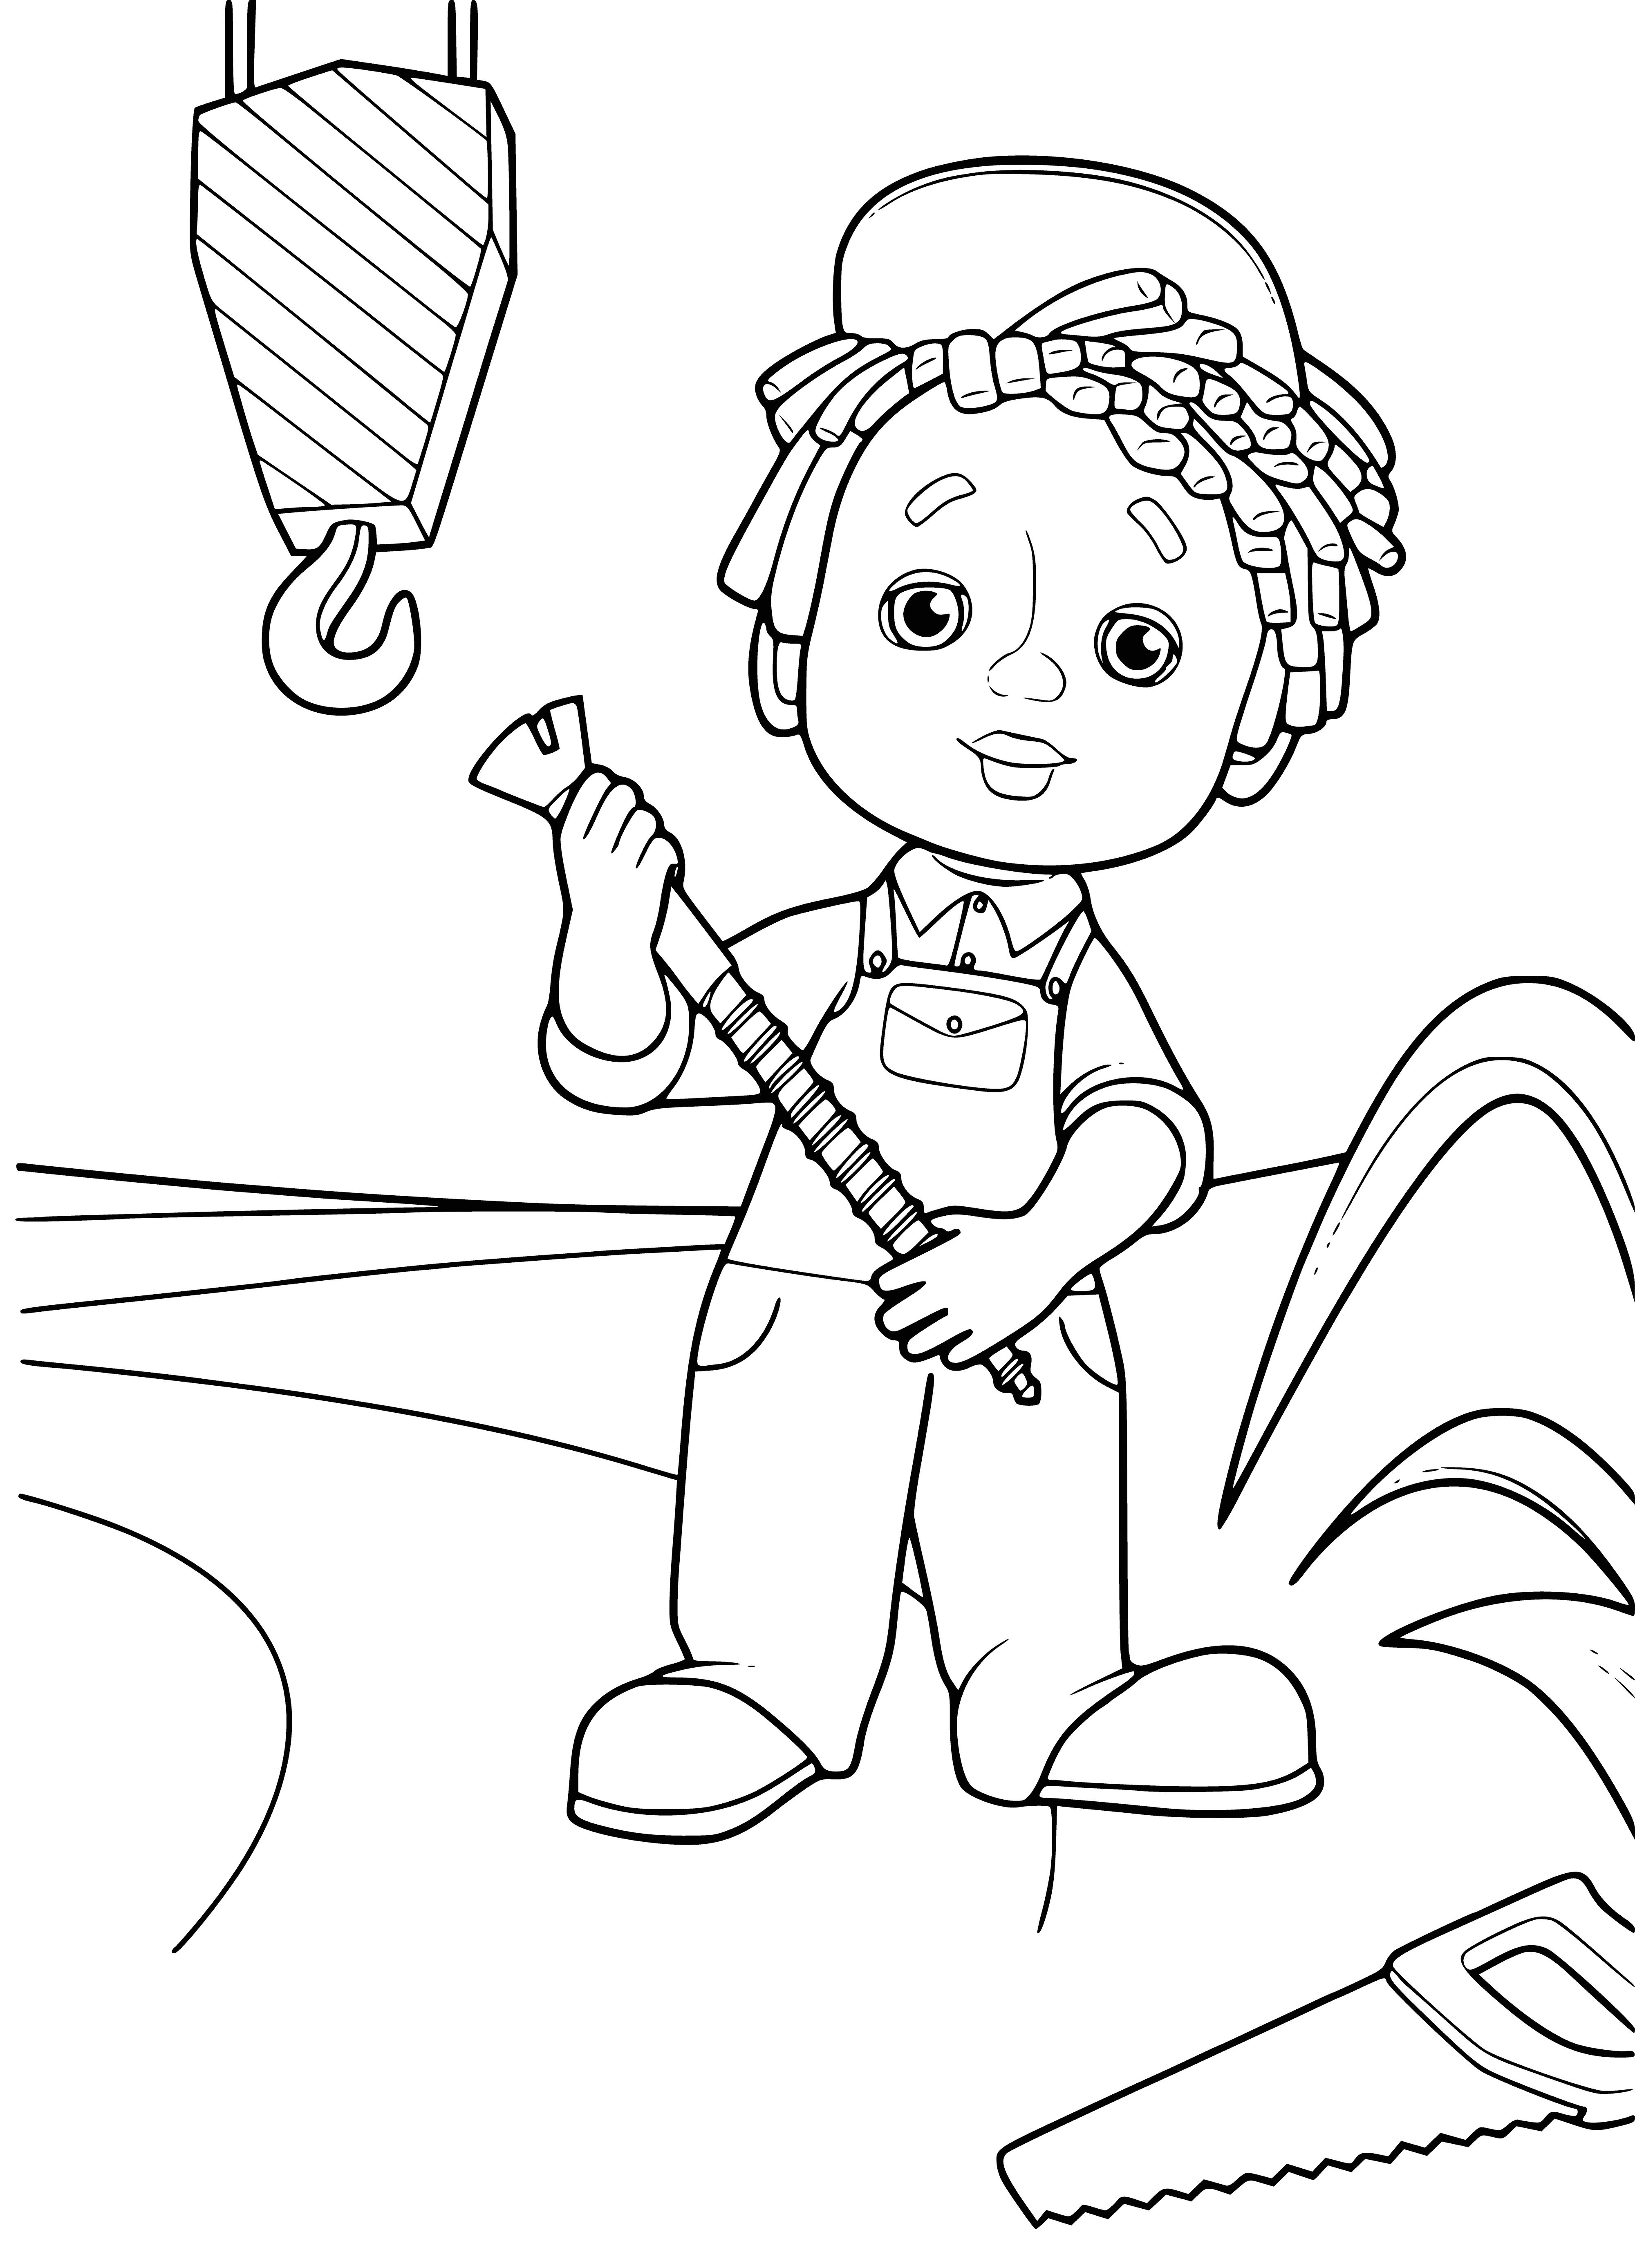 coloring page: Small animals rejoice as large dragon holds ball in commanding yet friendly presence.